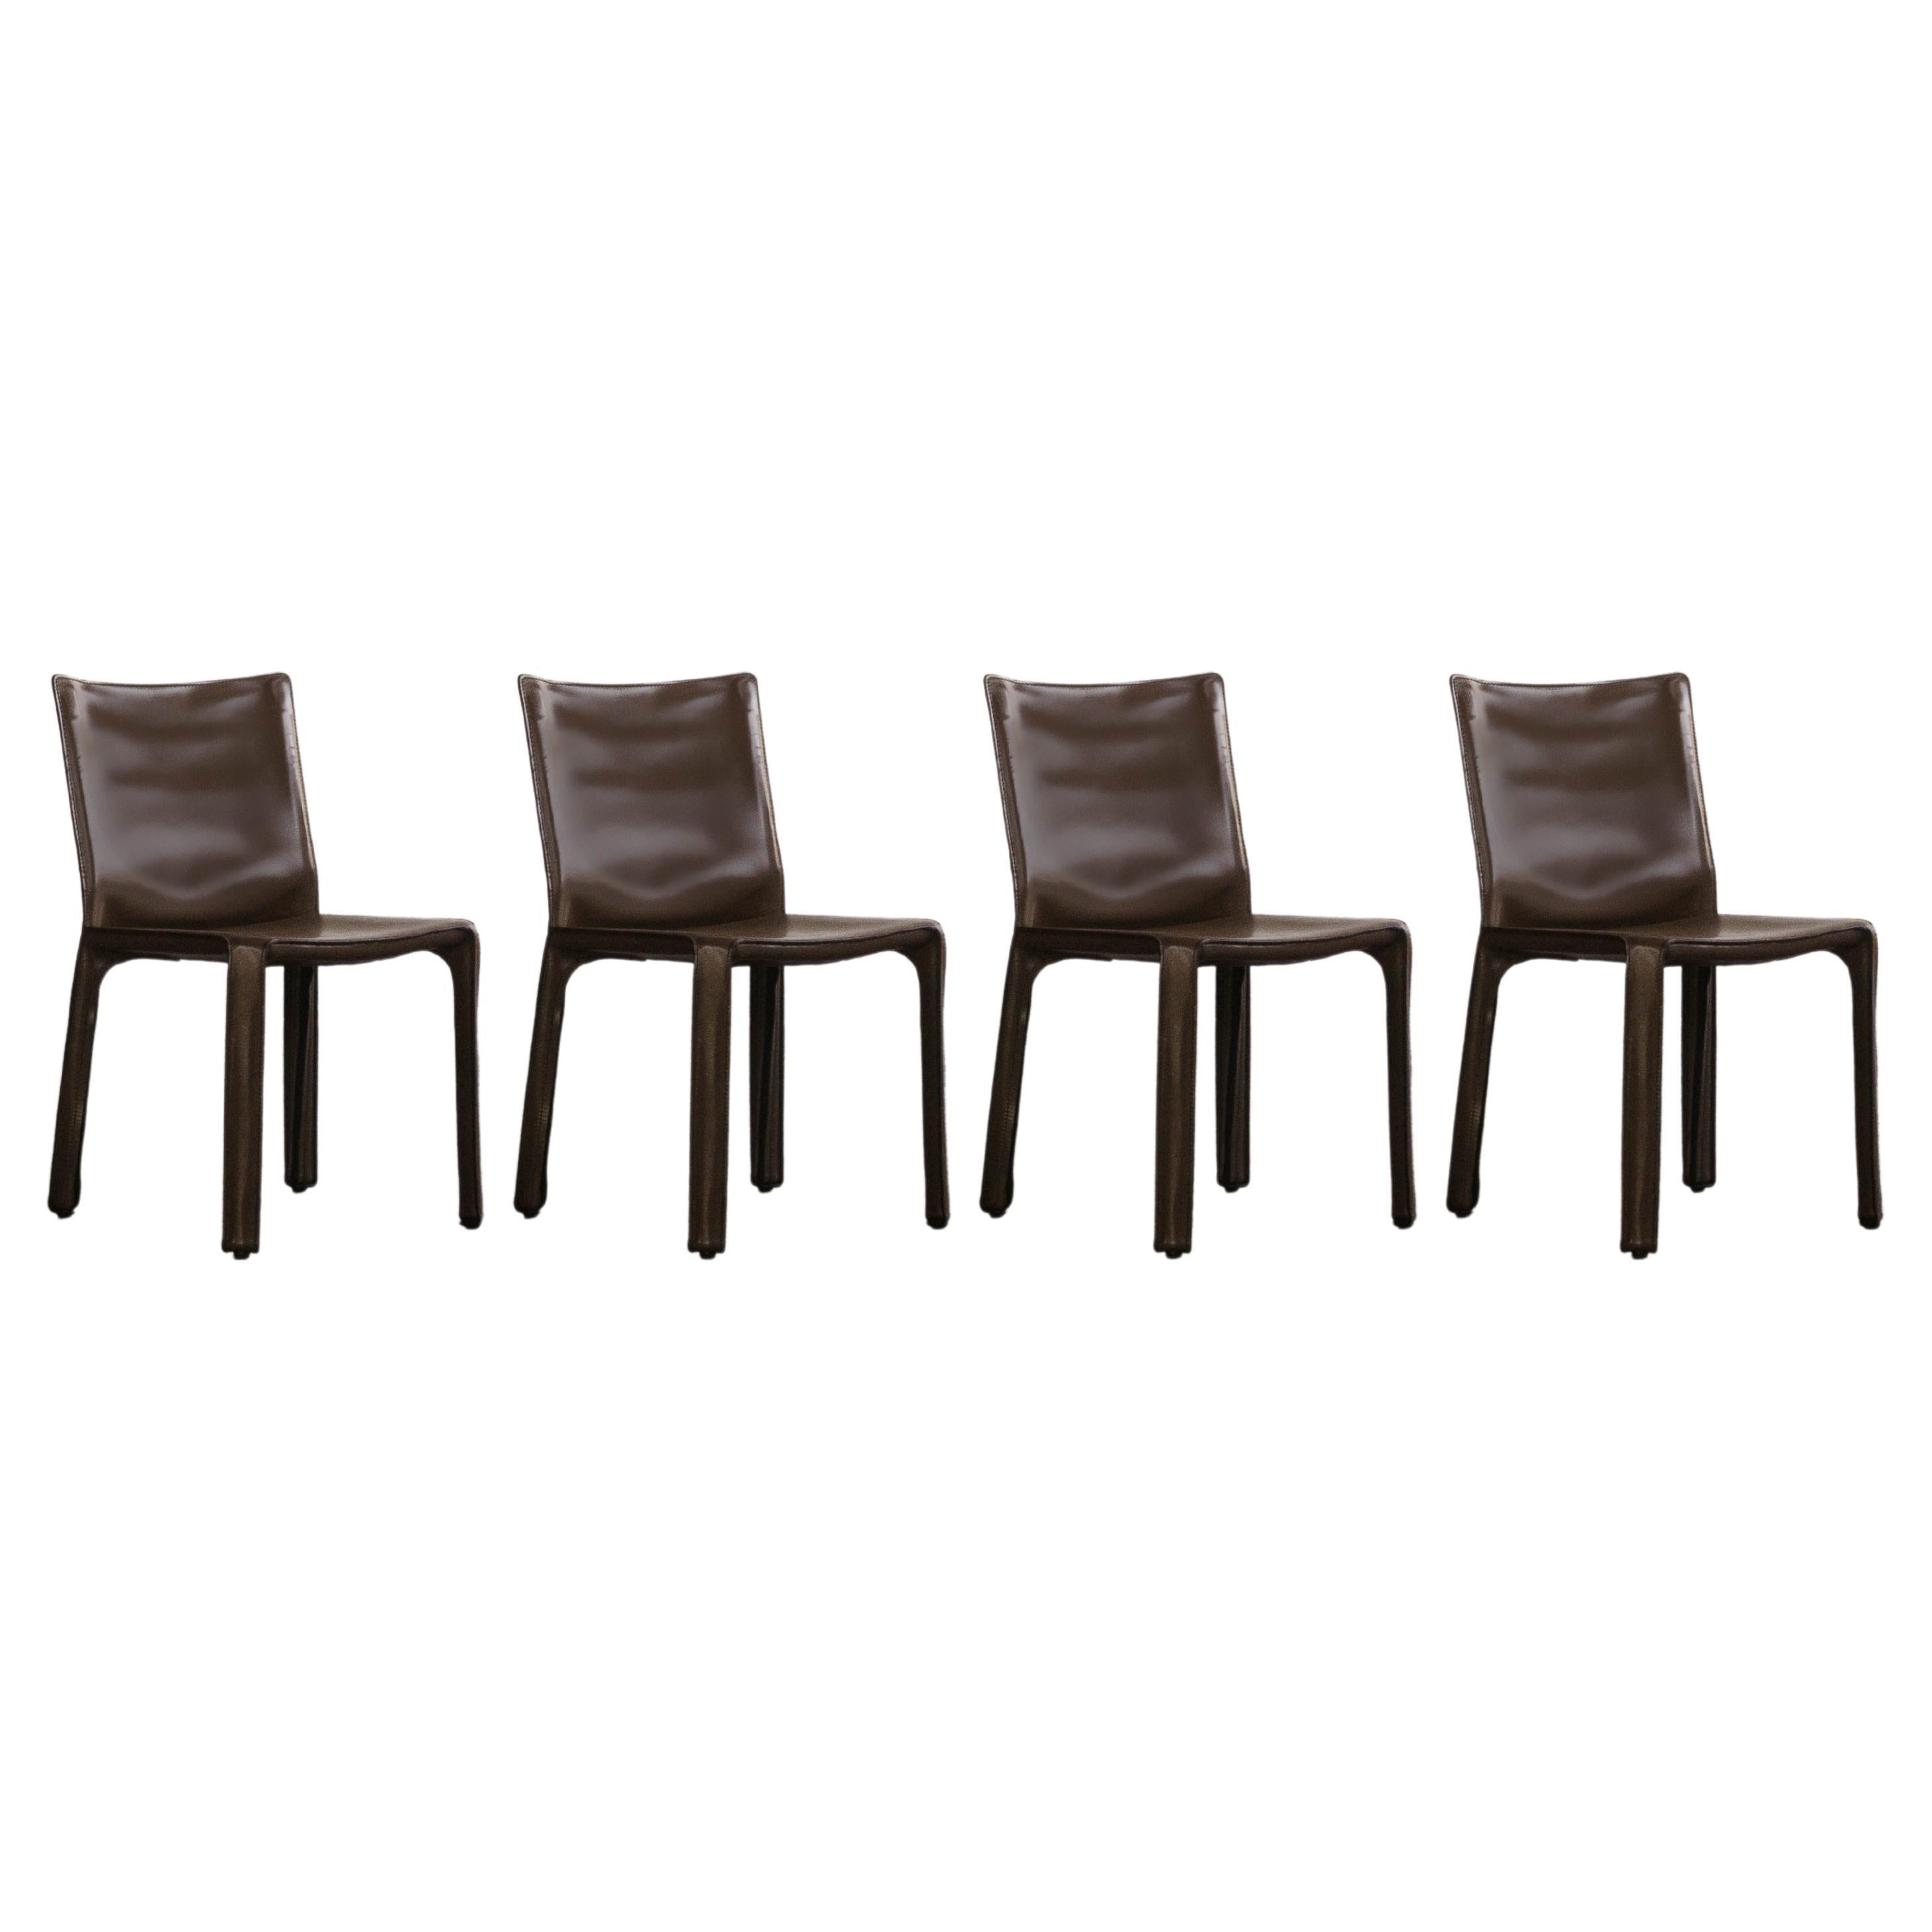 Mario Bellini "CAB 412” Dining Chairs for Cassina, 1978, Set of 4